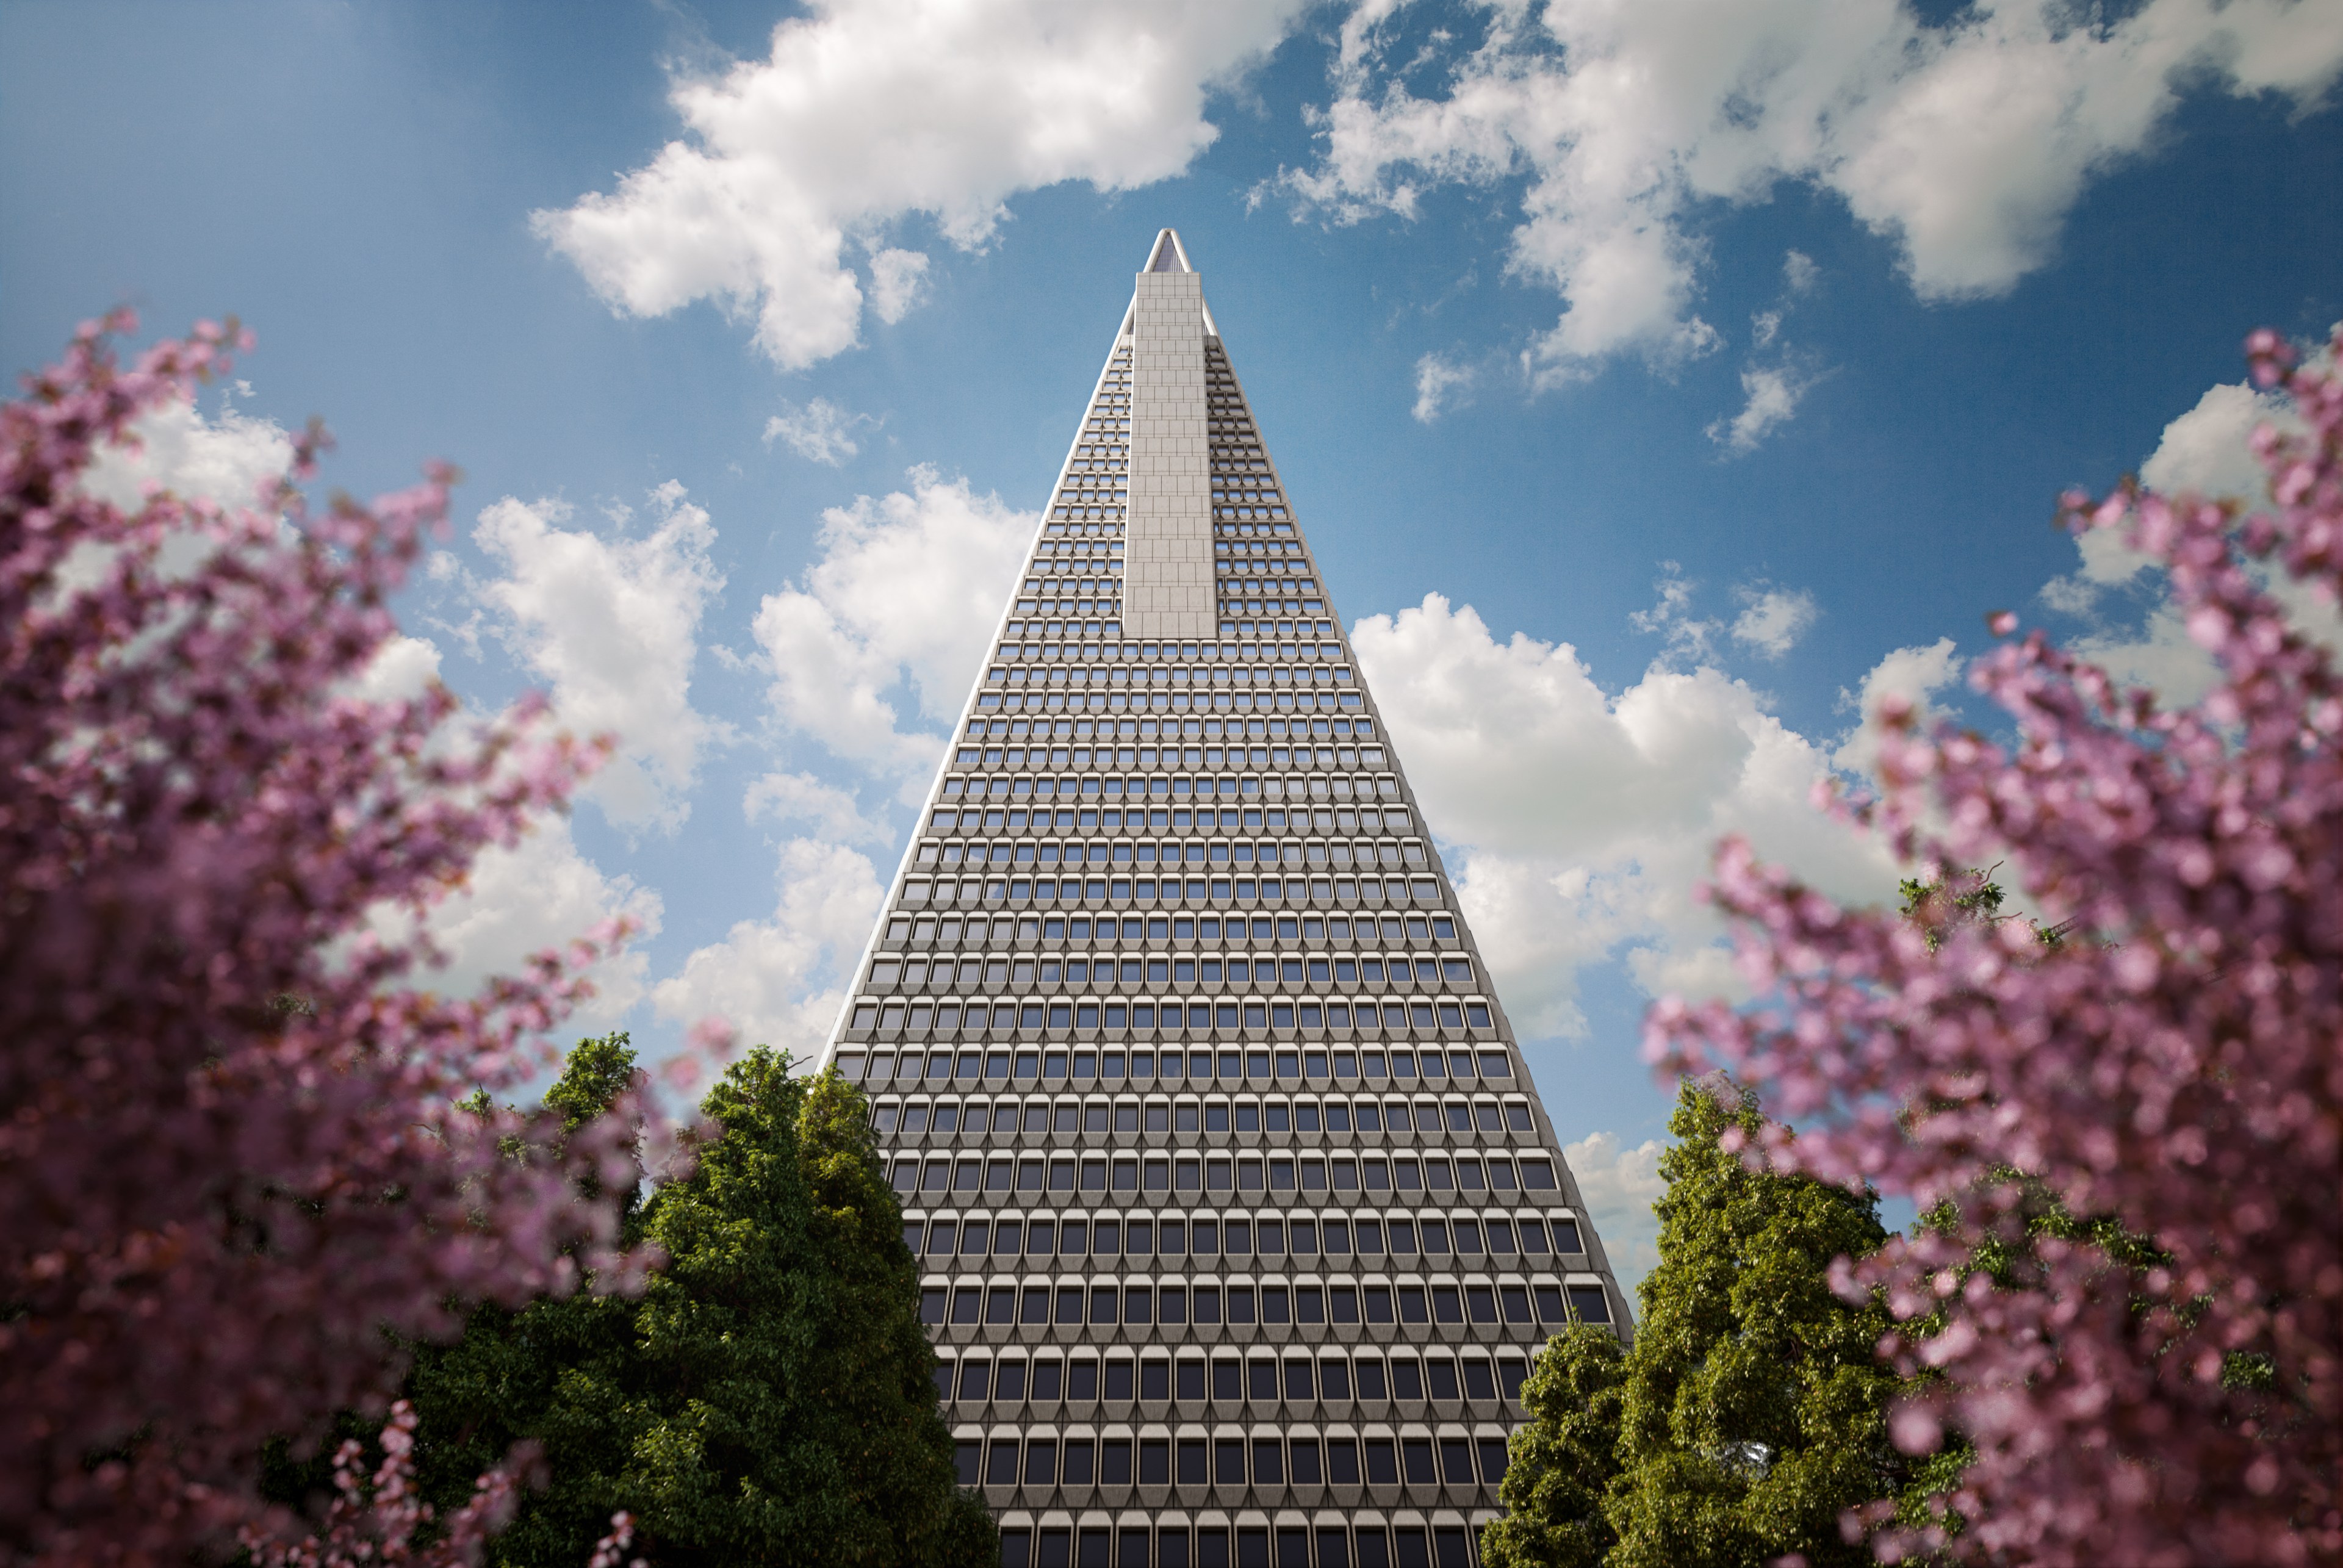 a pyramid skyscraper vanishes to a point amid cumulous clouds with cherry trees blooming at either side of the base